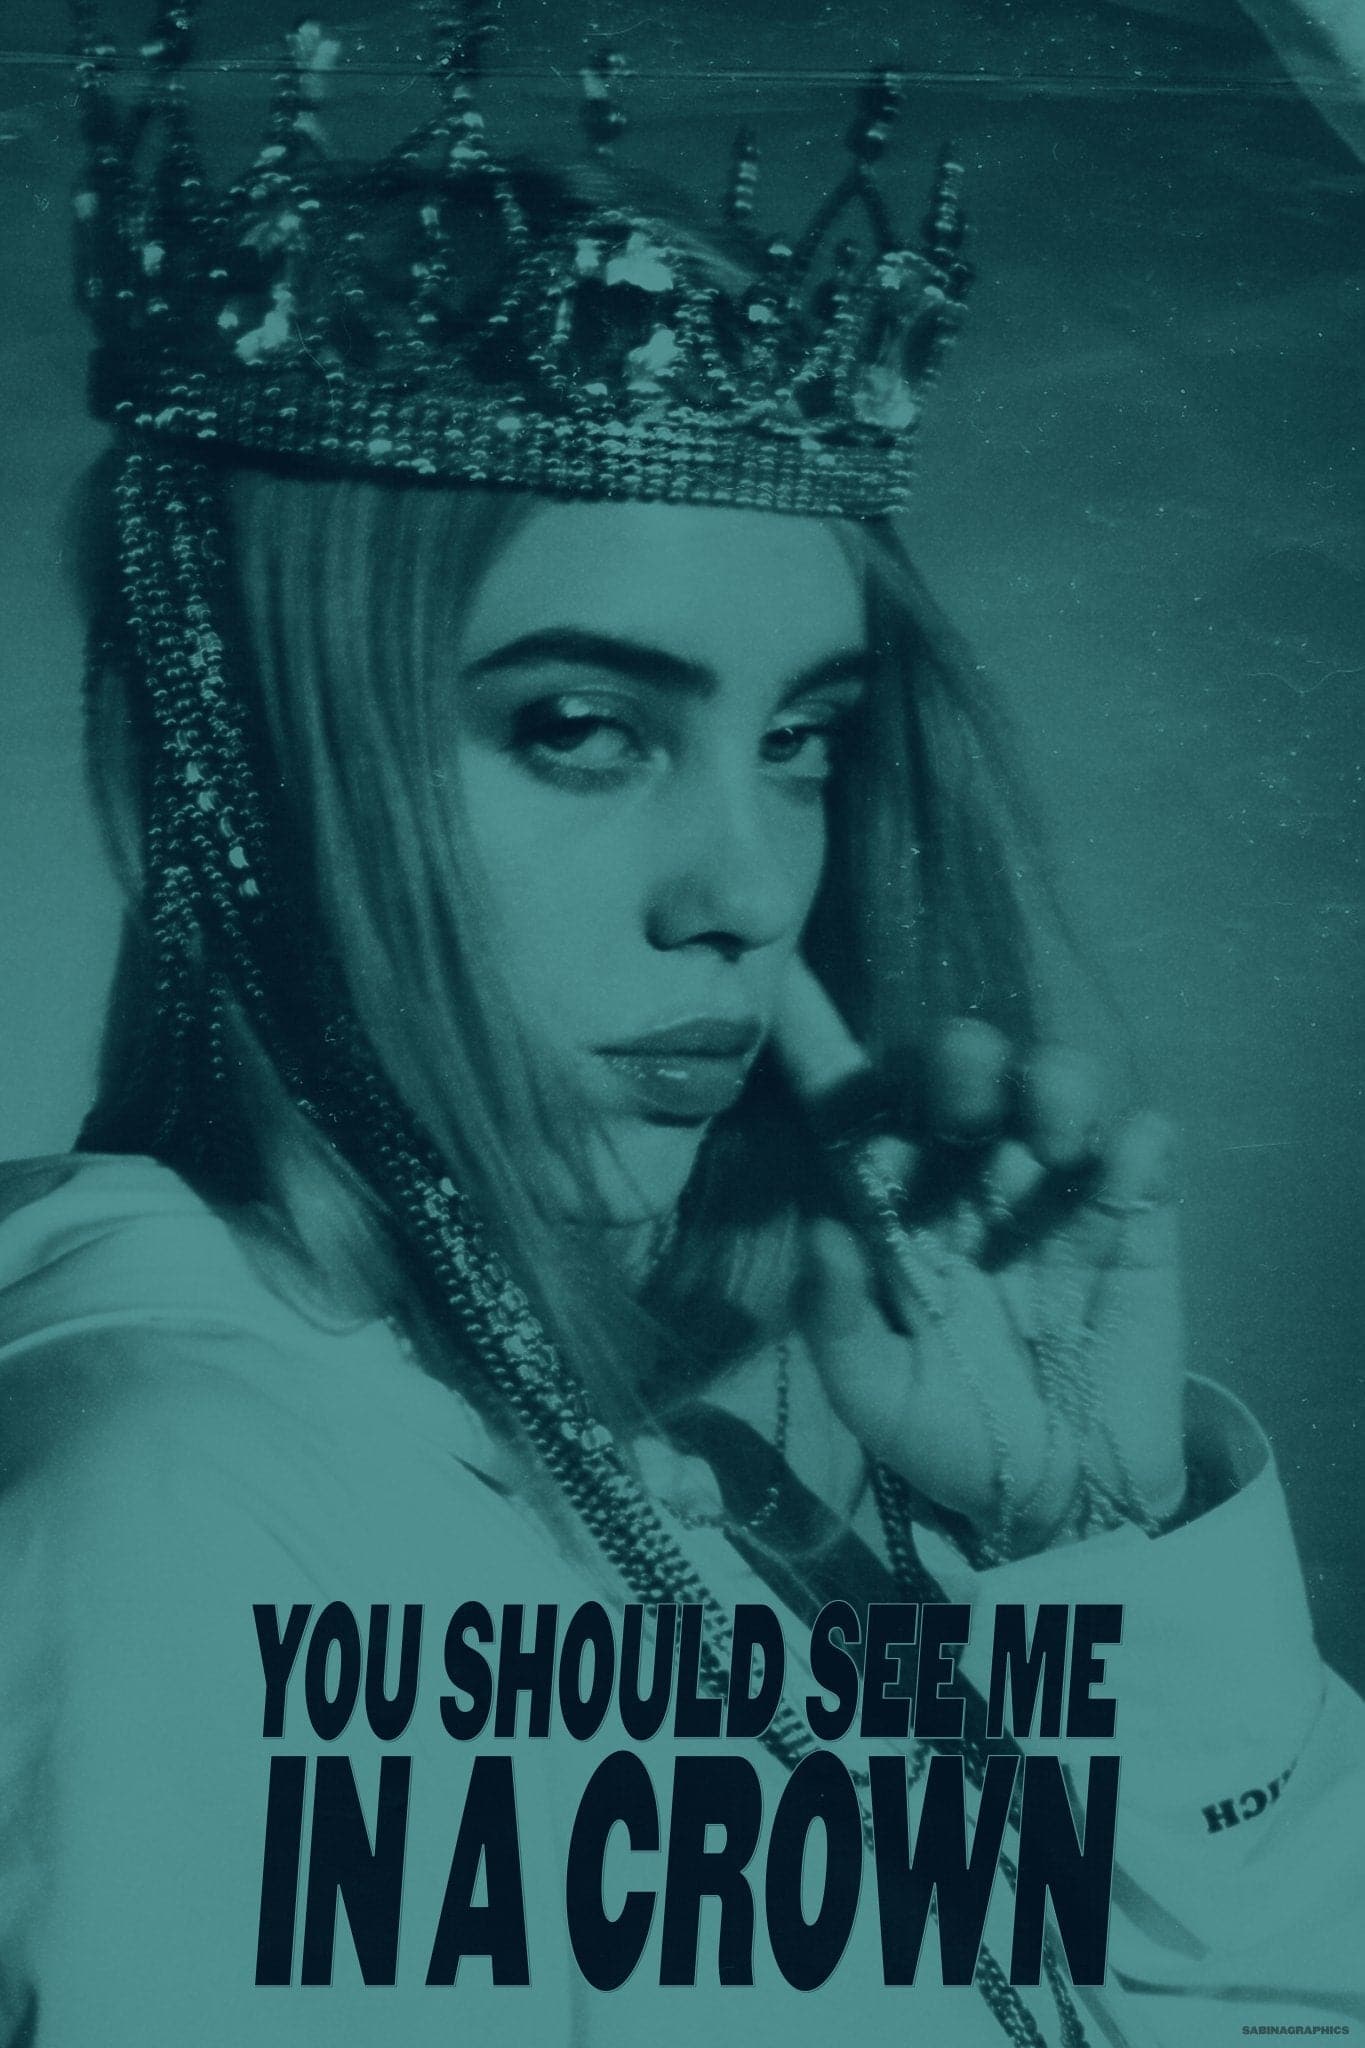 Billie Eilish ‘You Should See Me In A Crown’ Poster - Posters Plug